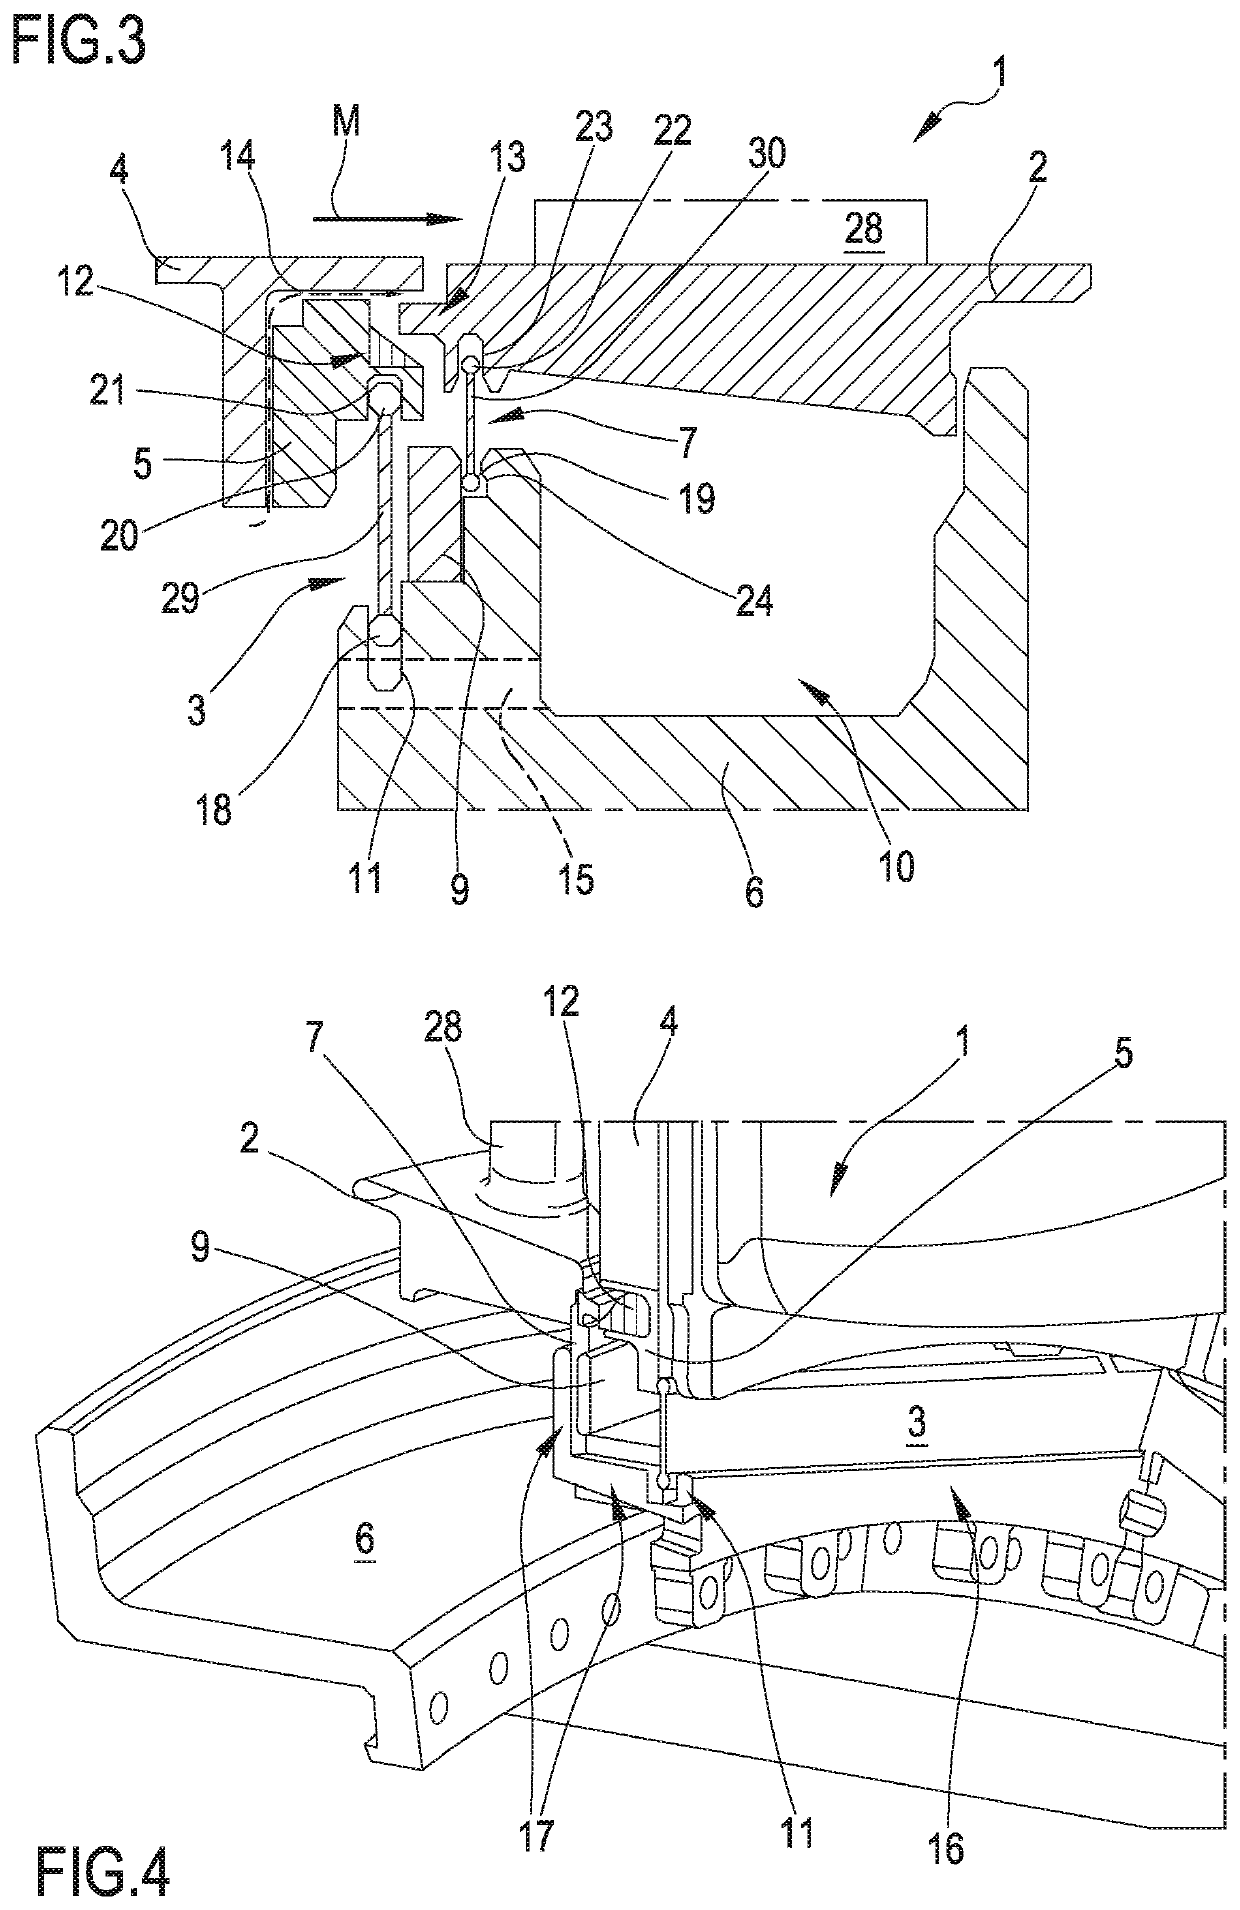 Sealing arrangement on combustor to turbine interface in a gas turbine